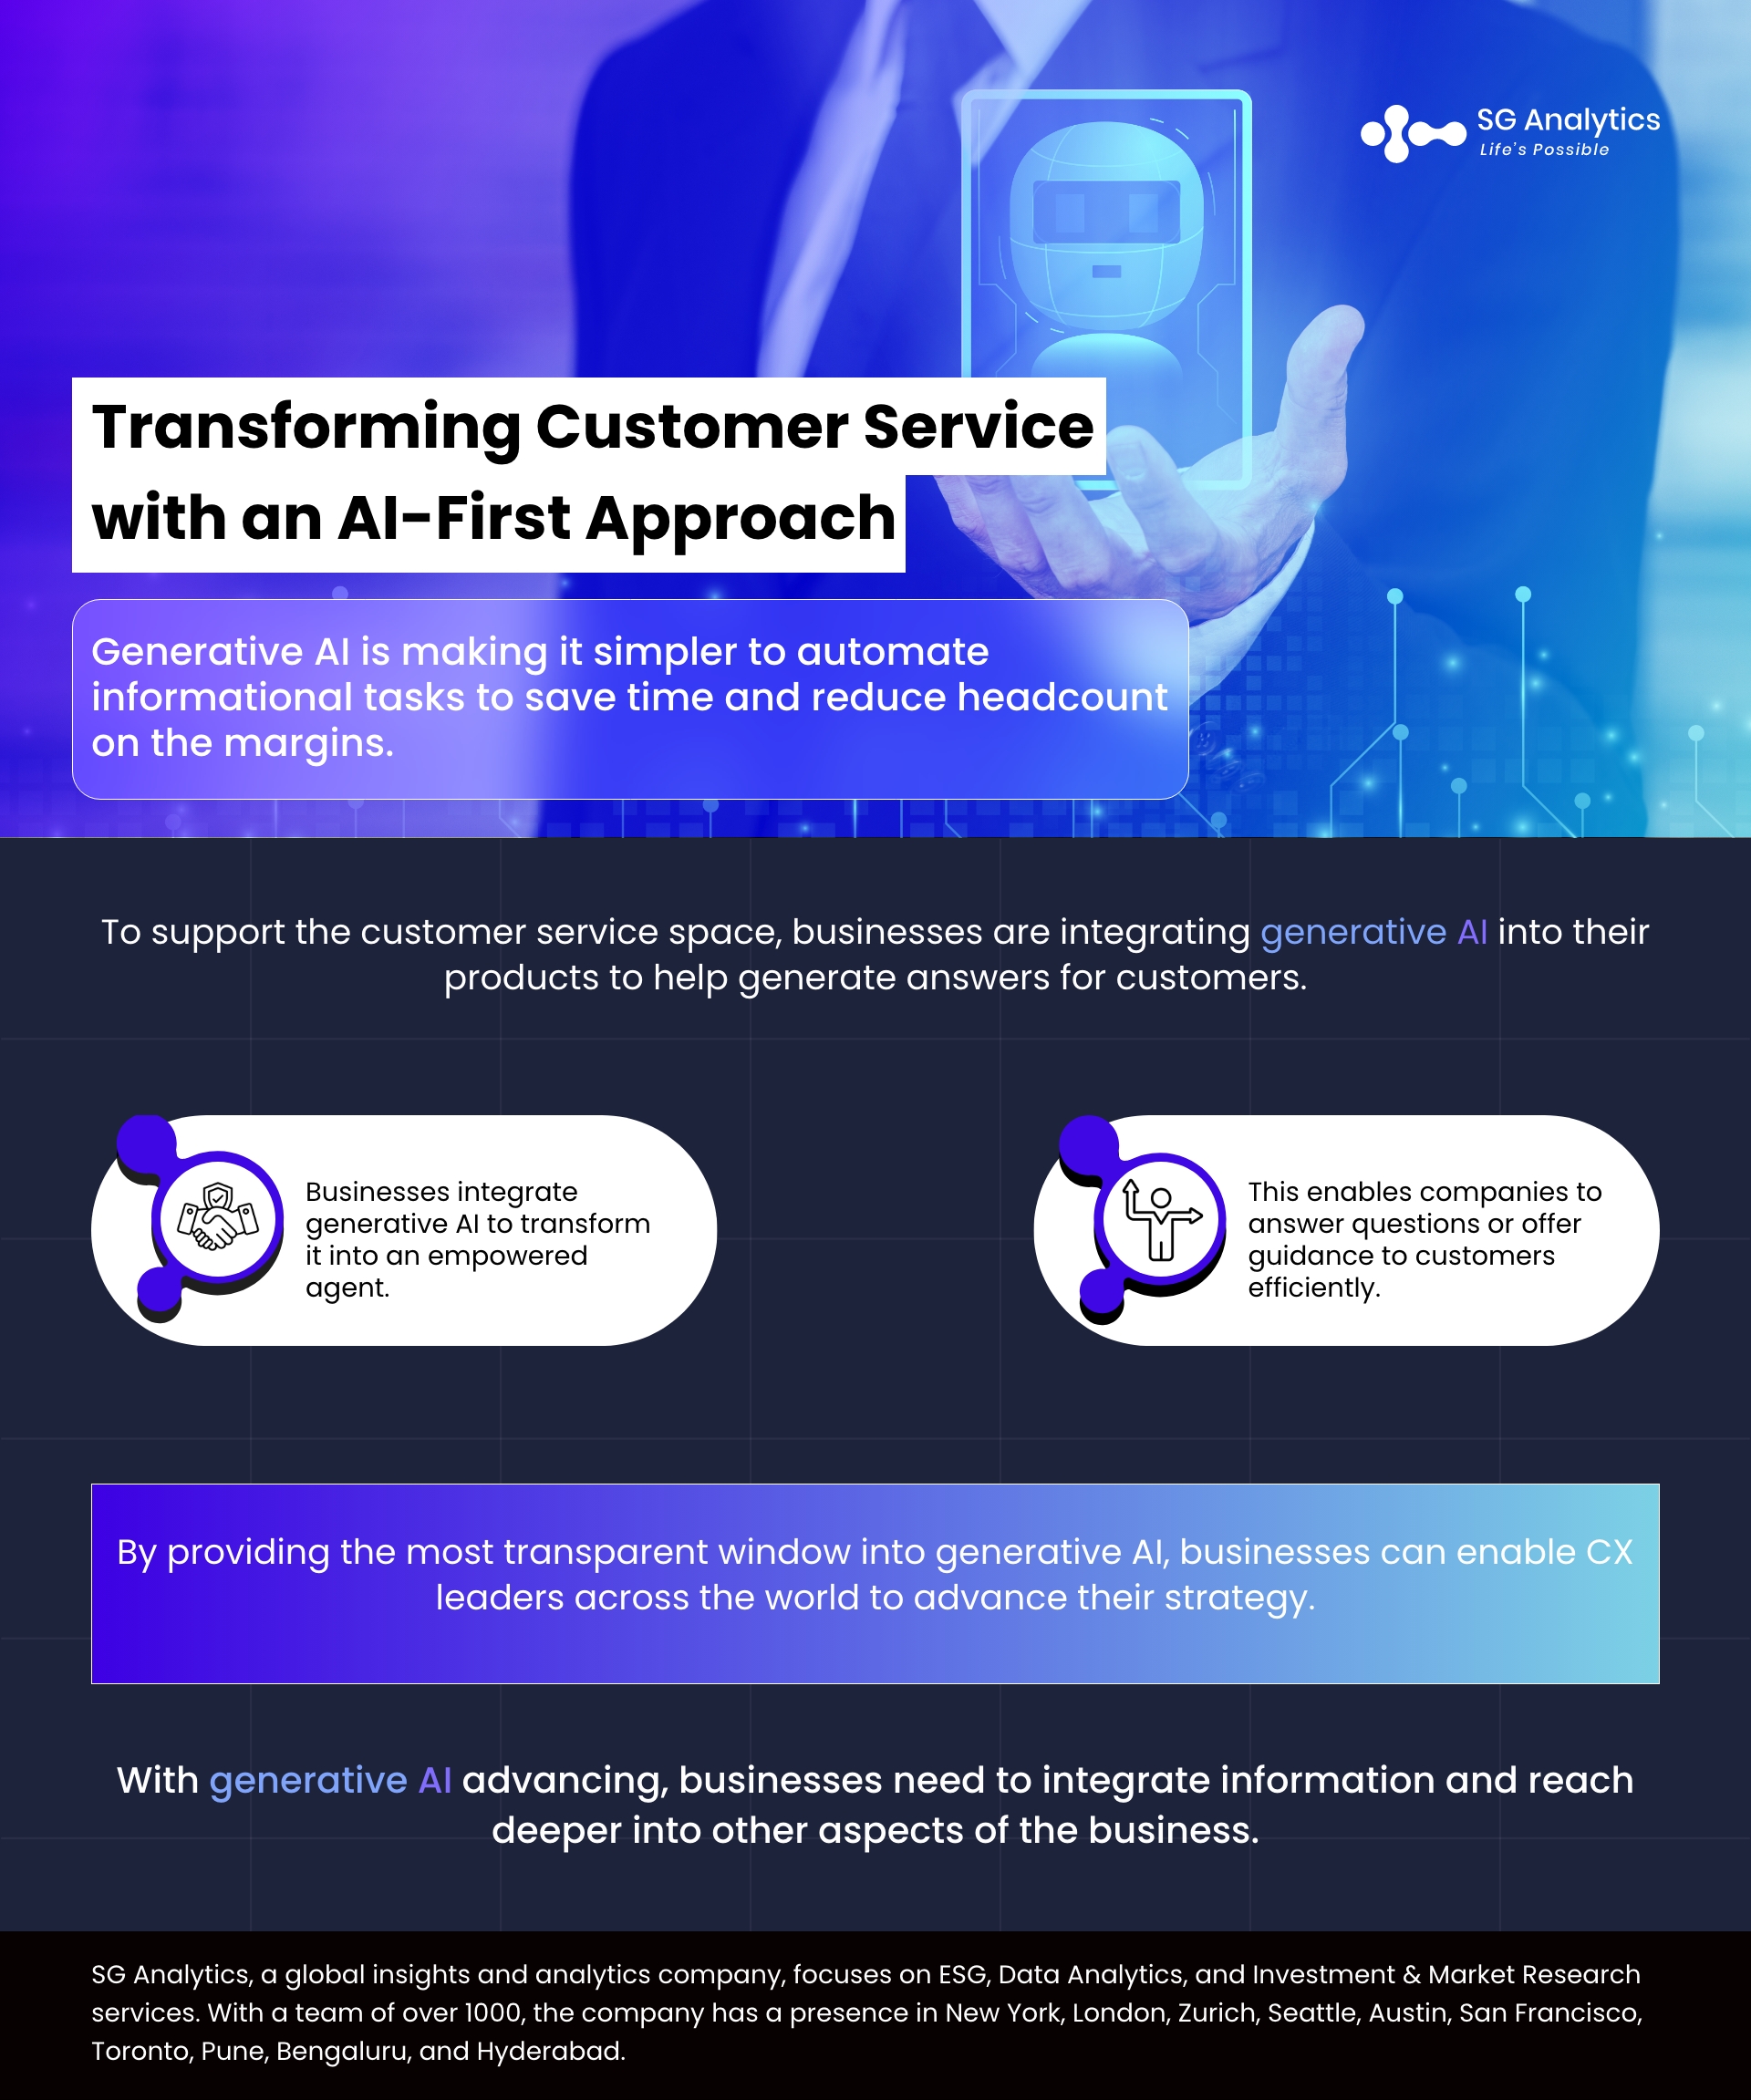 Transforming Customer Service with an AI-First Approach